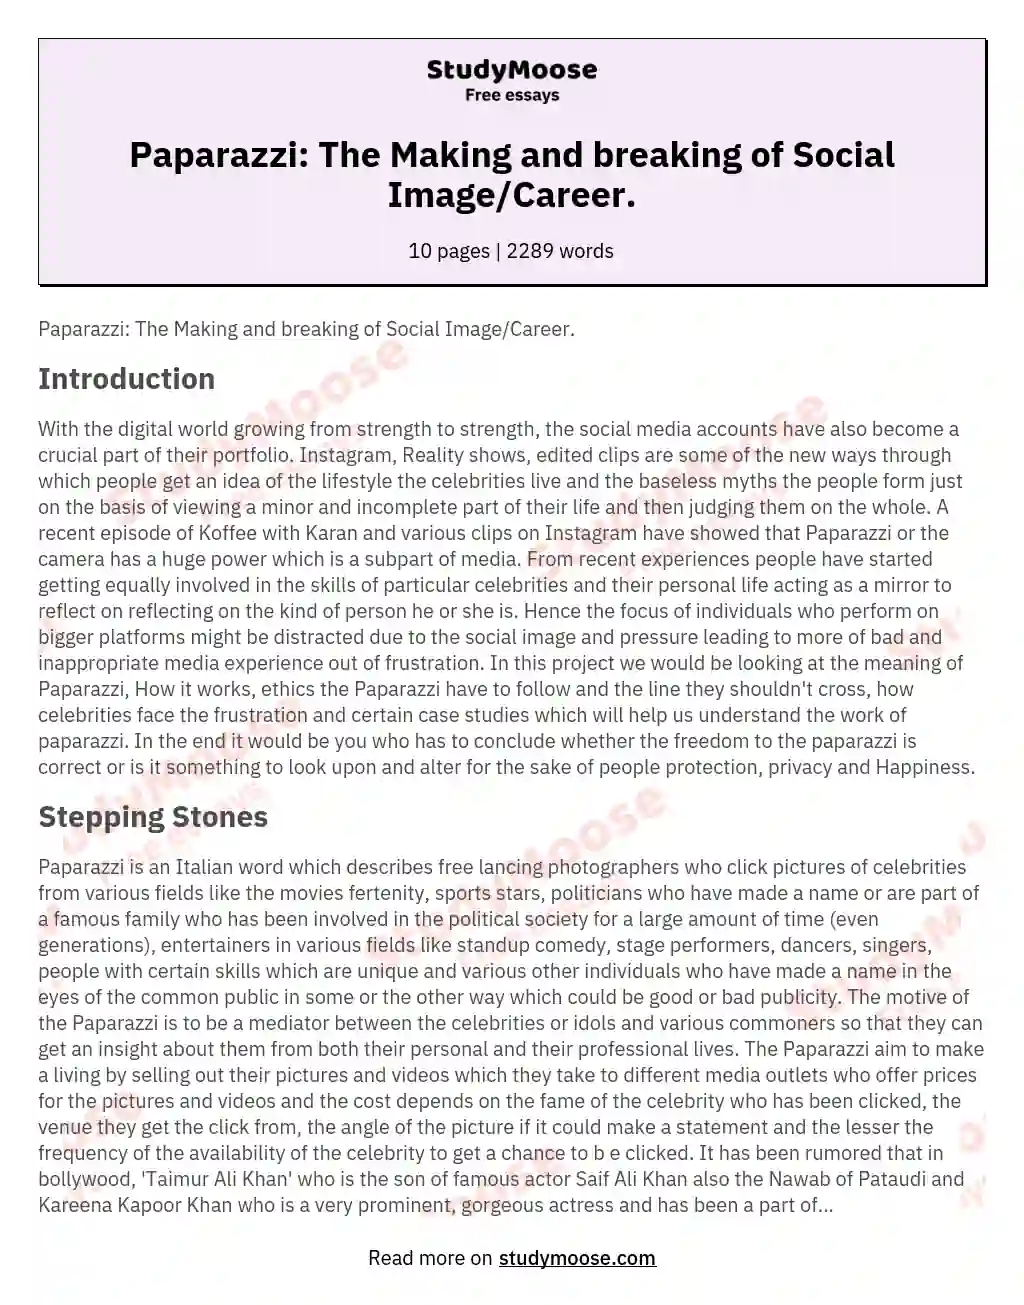 Paparazzi: The Making and breaking of Social Image/Career. essay